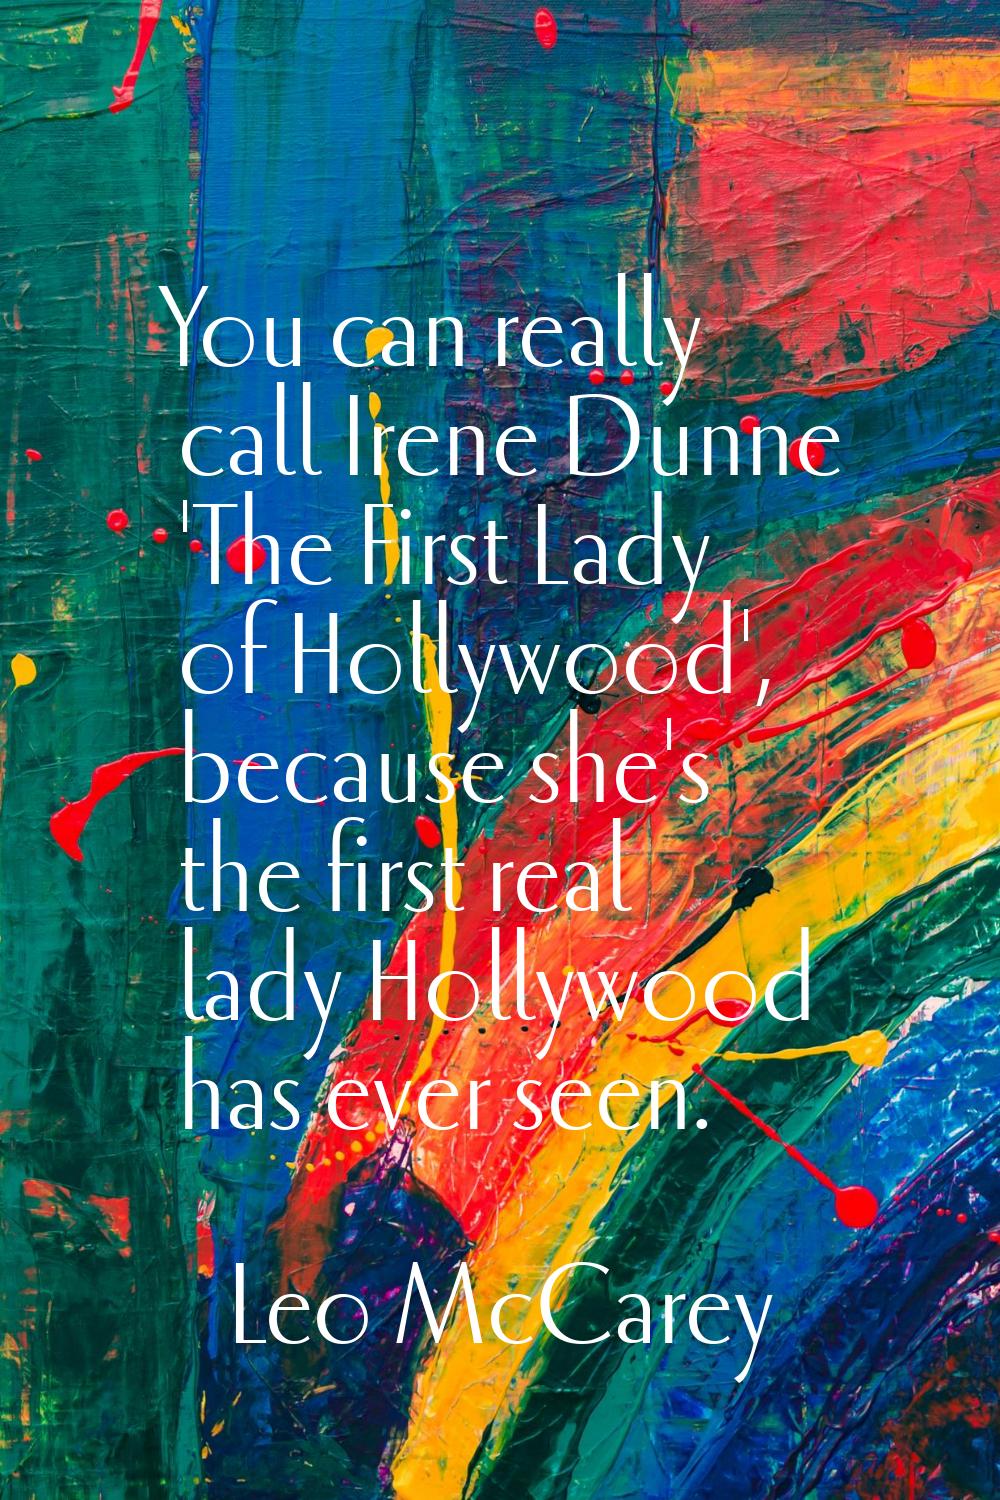 You can really call Irene Dunne 'The First Lady of Hollywood', because she's the first real lady Ho